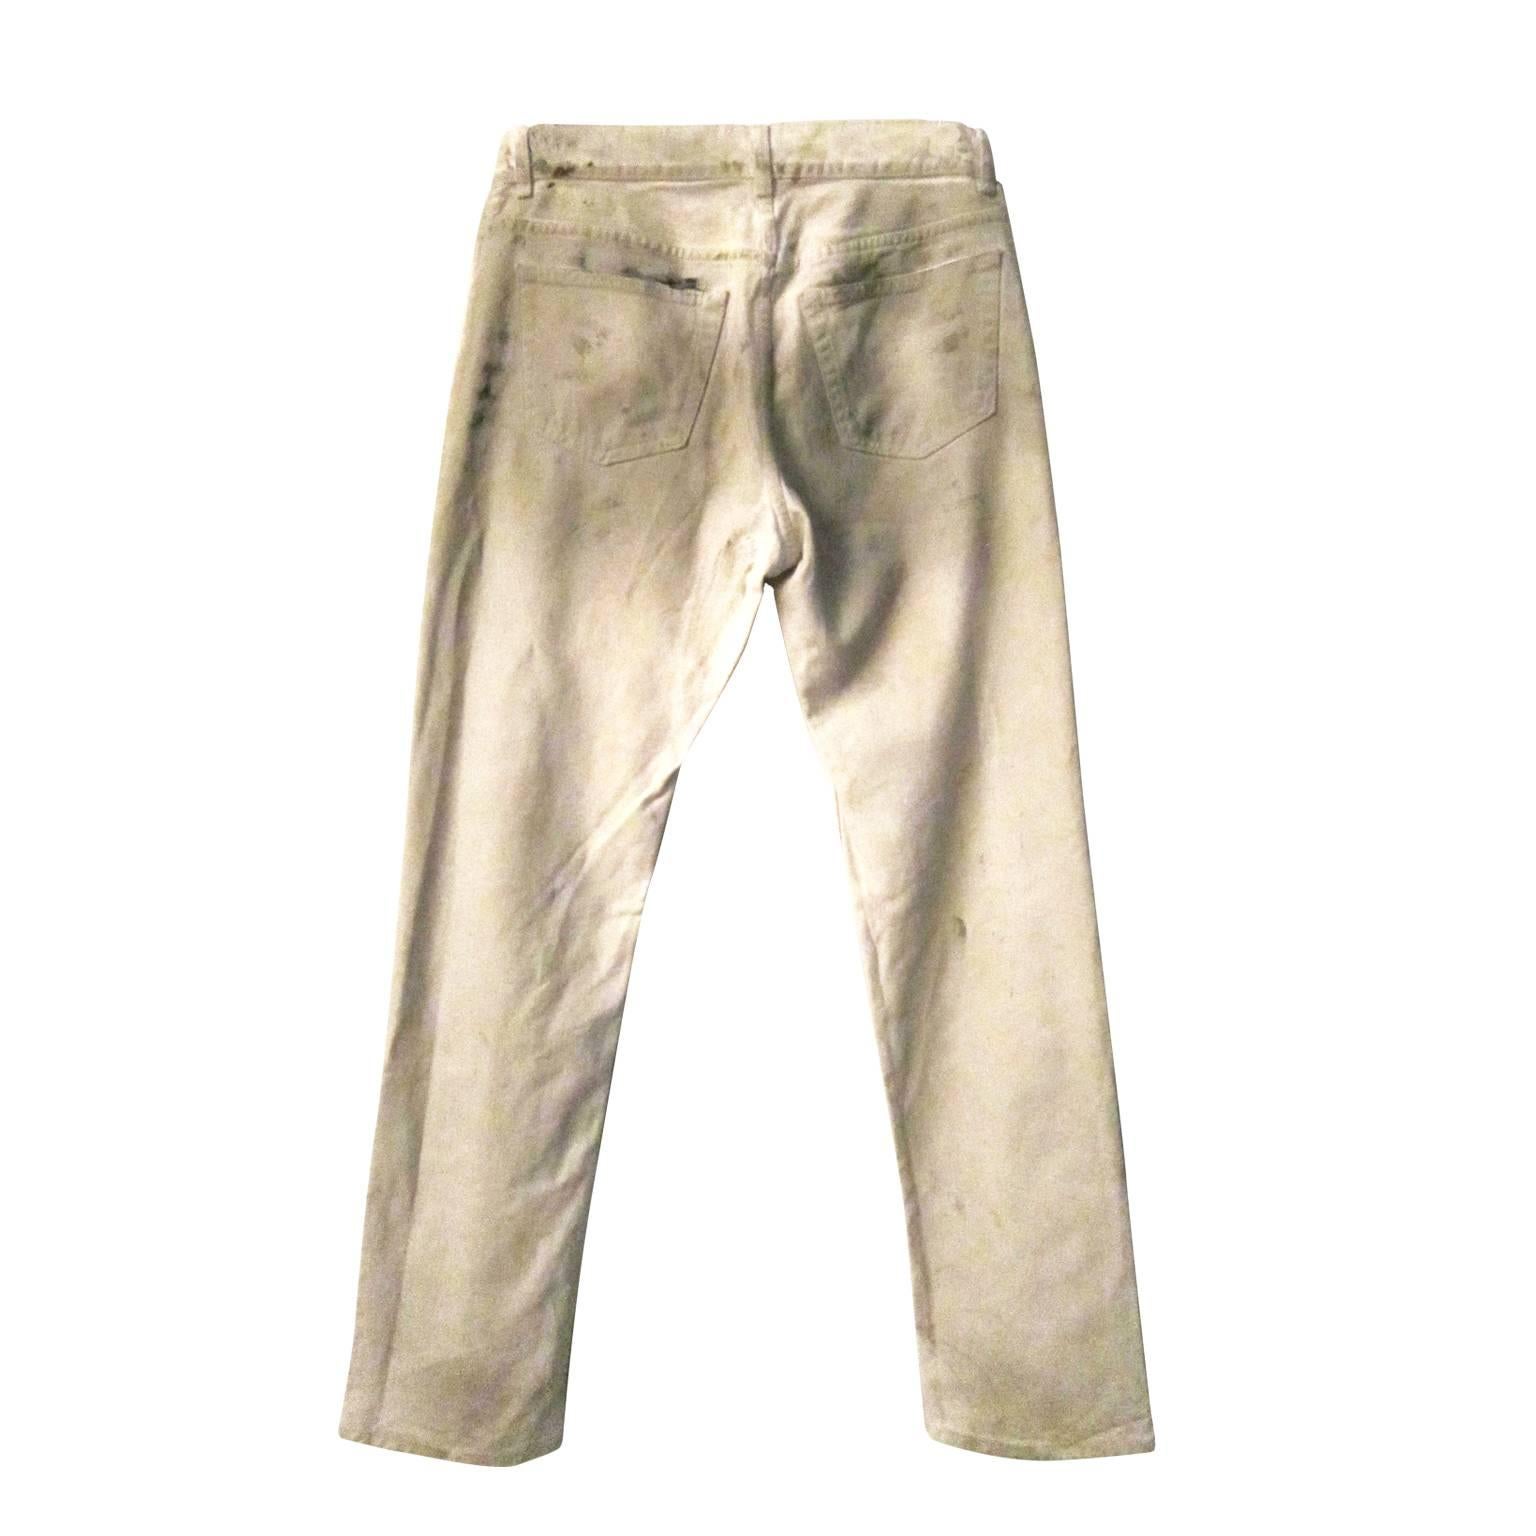 Helmut Lang painter jeans from end of 1990's. This pair has rare shades of colour grey on off-white heavyweight denim. 
Made in Italy.
Measurements :
Waist : 84 cm
Length : 112 cm
